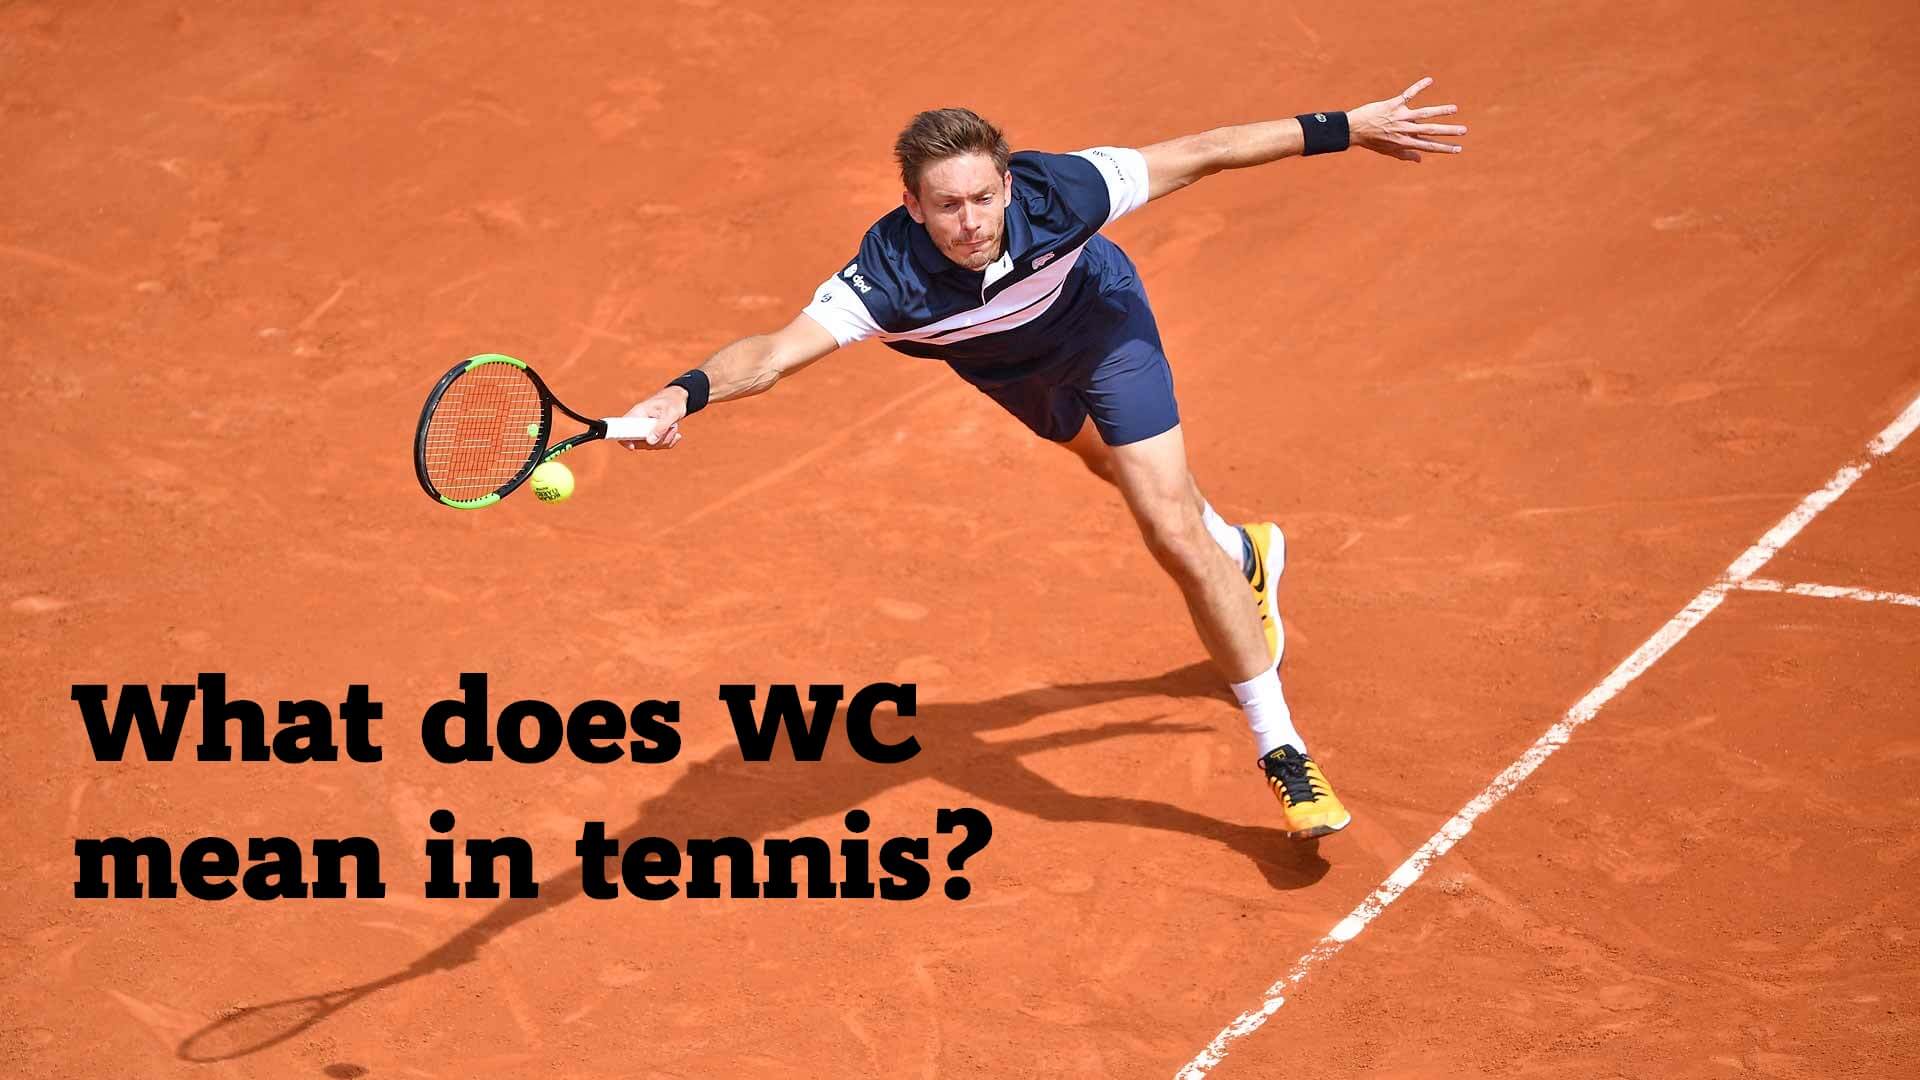 What does WC mean in tennis?